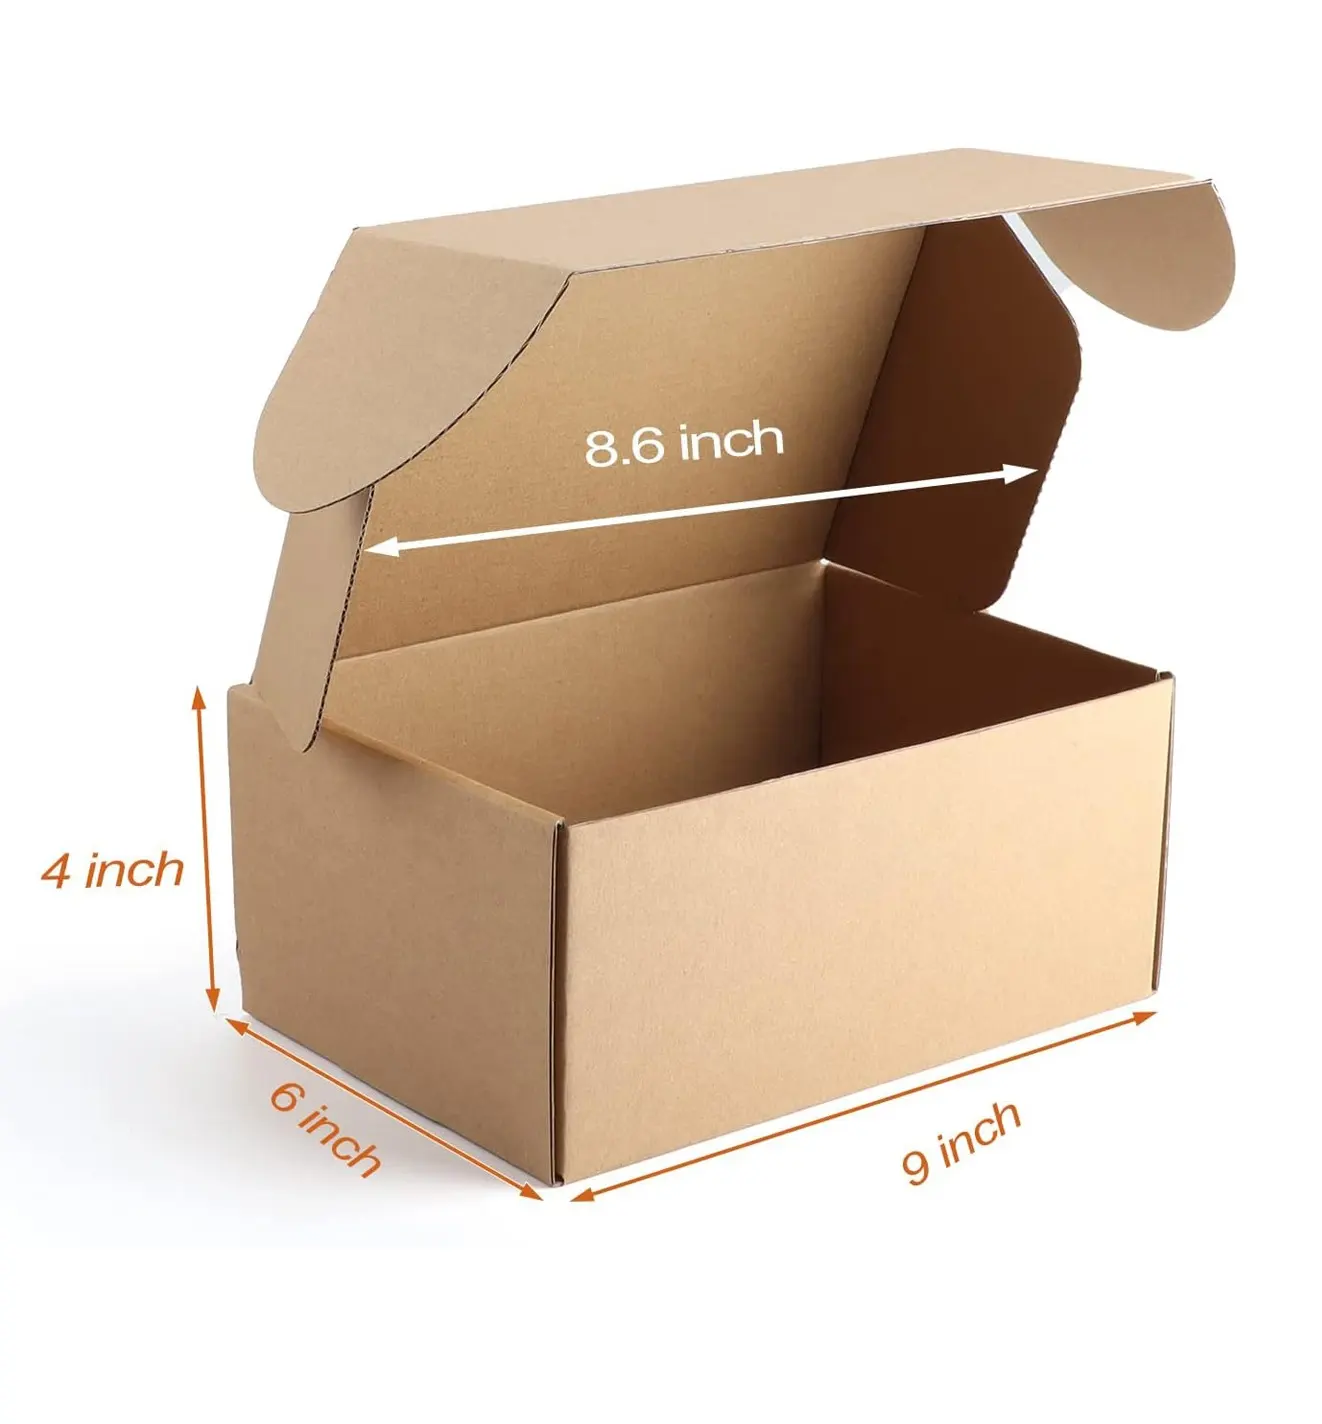 9x6x4 inch Shipping Boxes 100 Pack, Brown Cardboard Gift Boxes with Lids for Wrapping Giving Presents, Corrugated Mailer Boxes